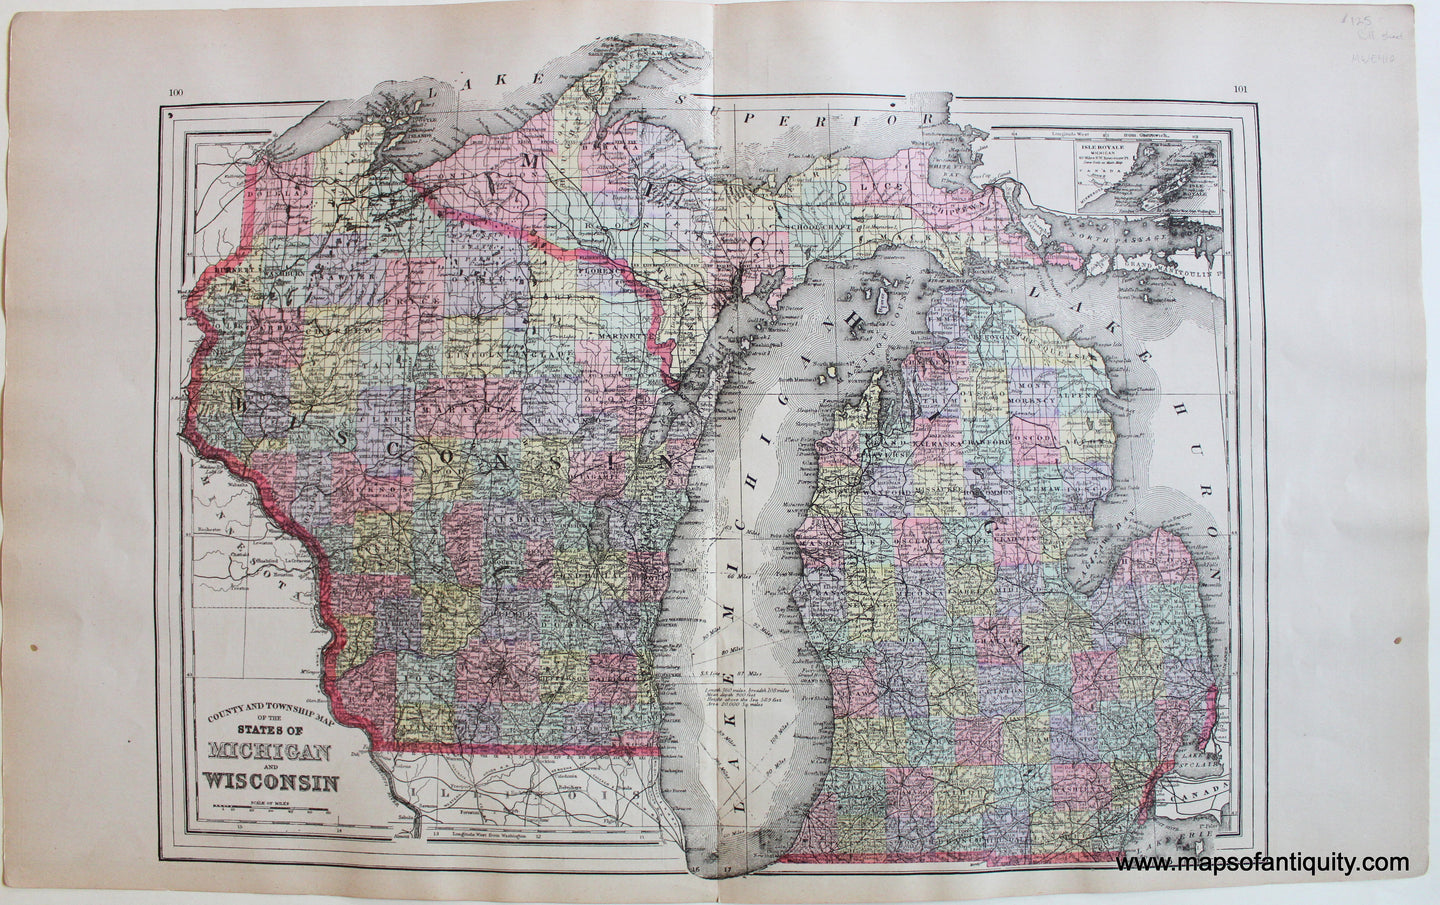 Antique-Hand-Colored-Map-County-and-Township-Map-of-the-States-of-Michigan-and-Wisconsin;-Verso-maps:-Plan-of-the-City-of-Detroit-County-Map-of-Minnesota-1895-Wanamaker/Smith-Midwest-1800s-19th-century-Maps-of-Antiquity